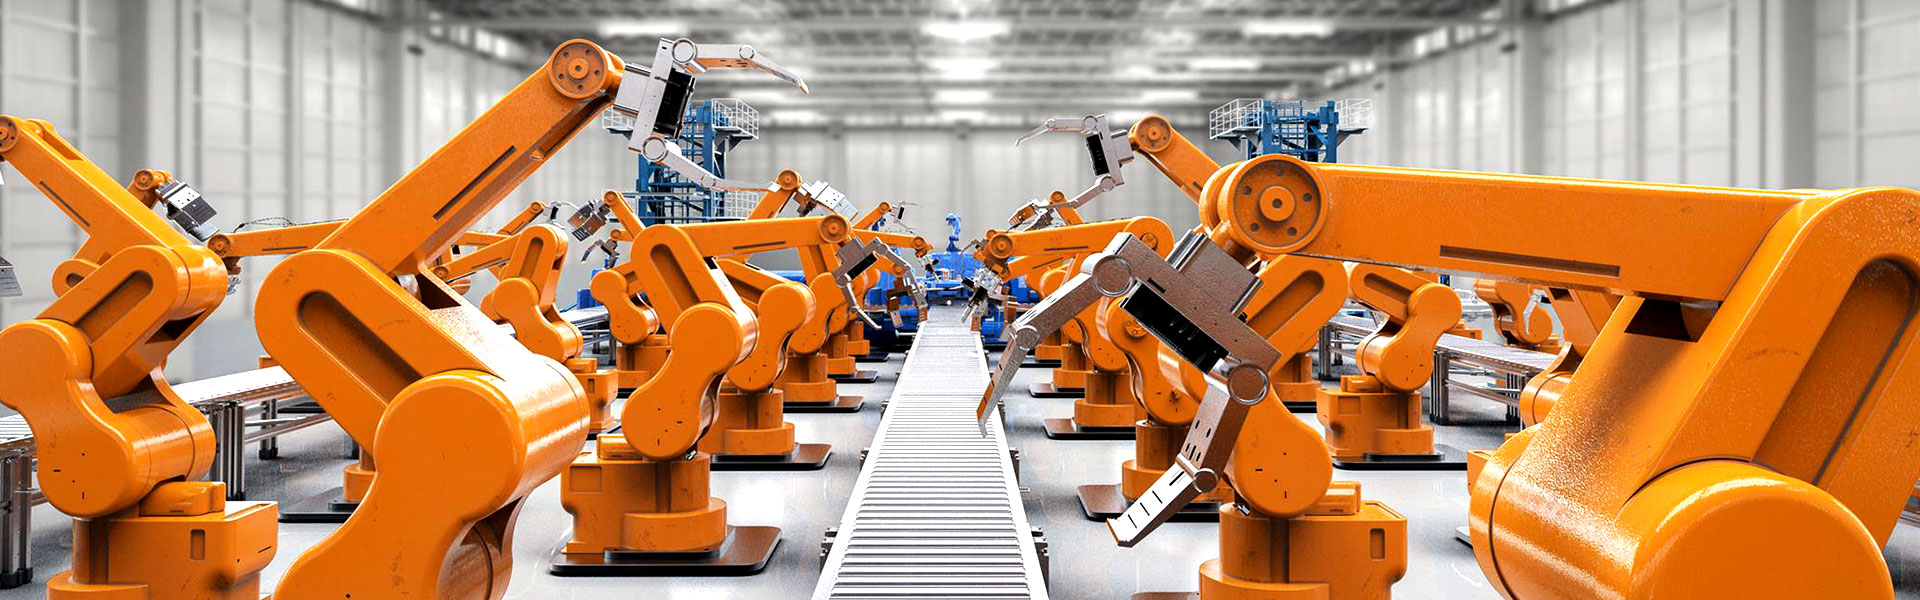 The Effects of Automation on Manufacturing